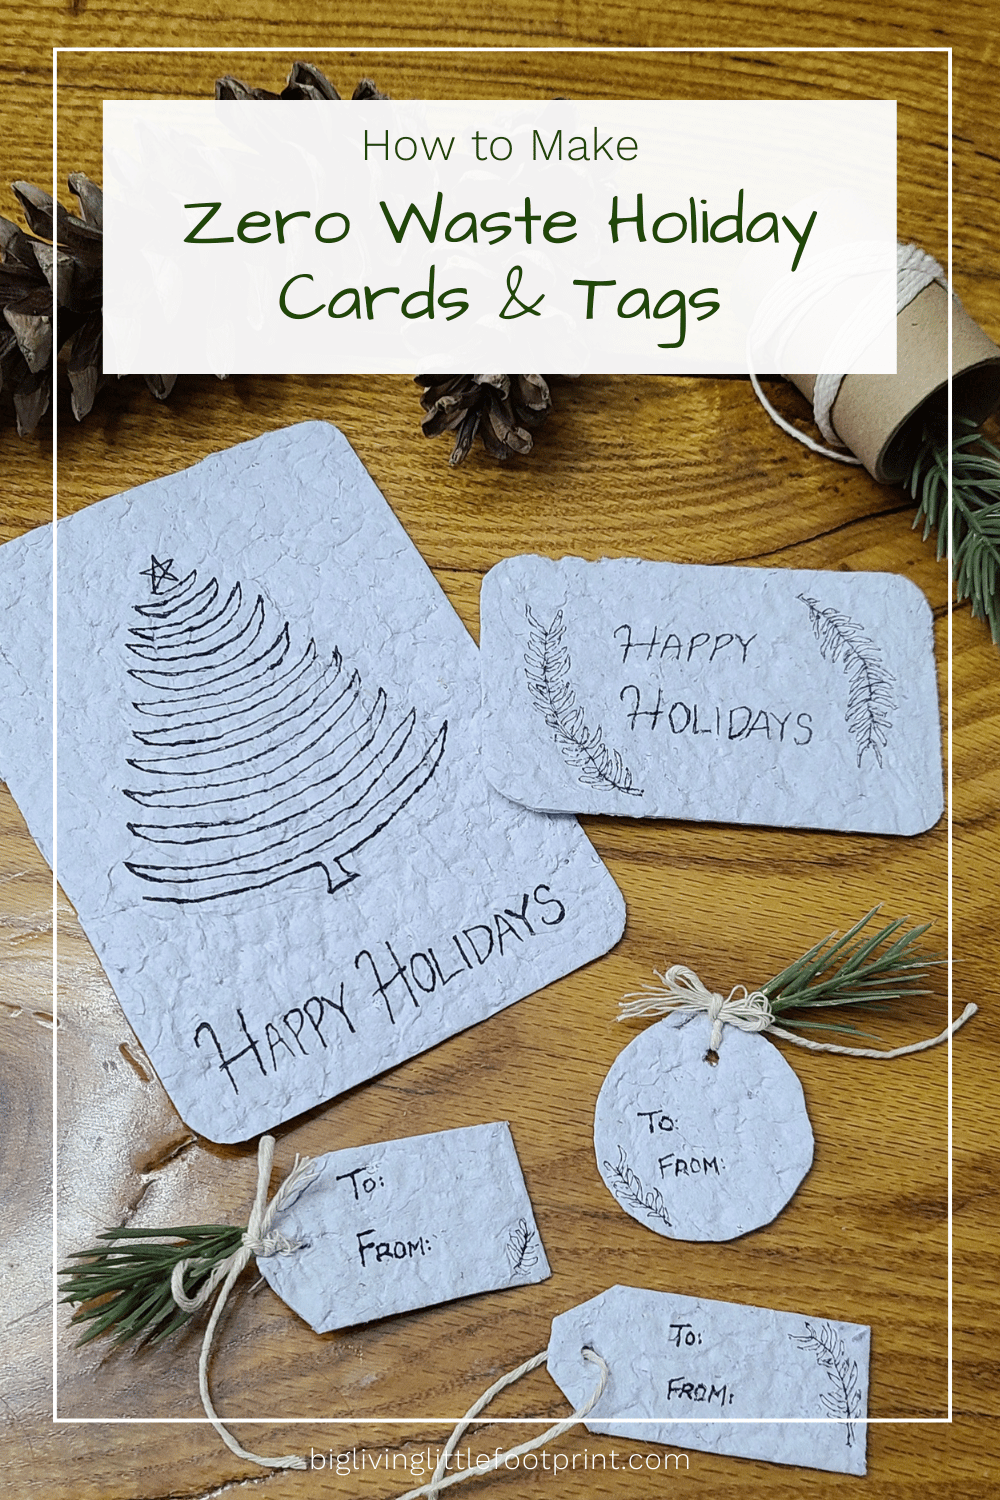 How to Make Zero Waste Holiday Cards & Tags